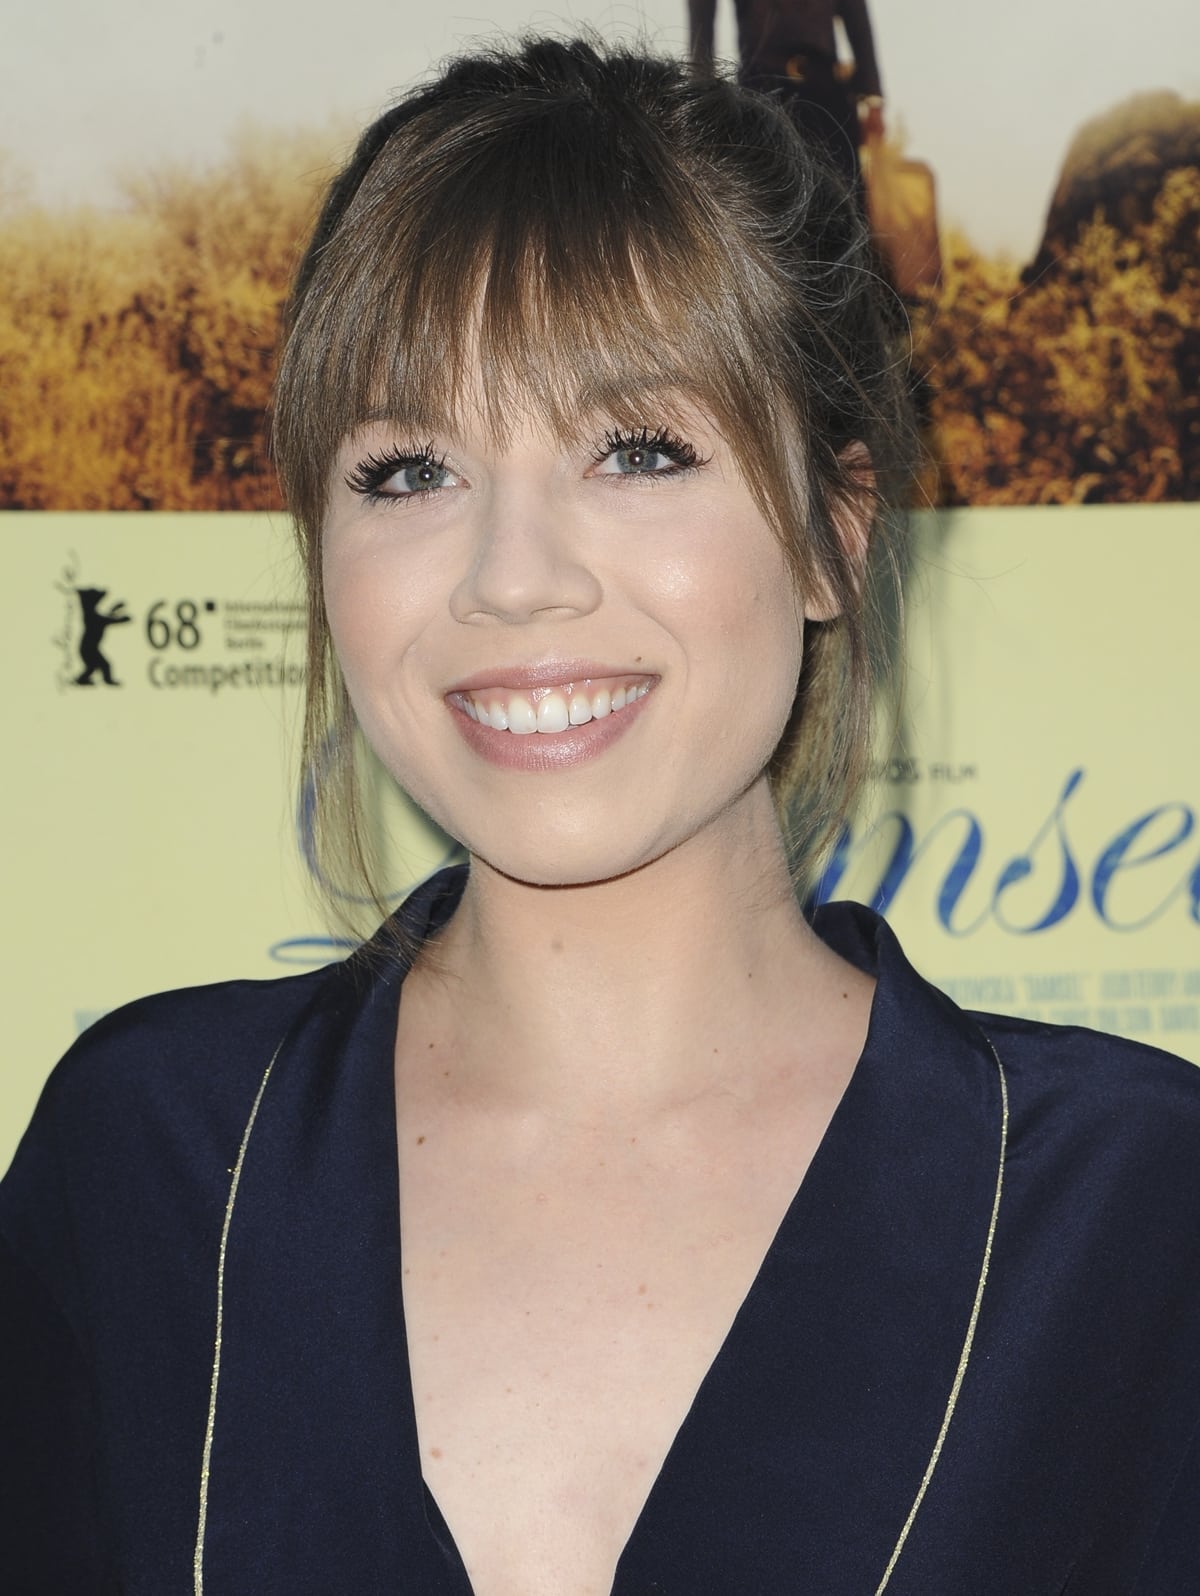 Jennette McCurdy has accused American television producer Dan Schneider of having an unhealthy foot fetish